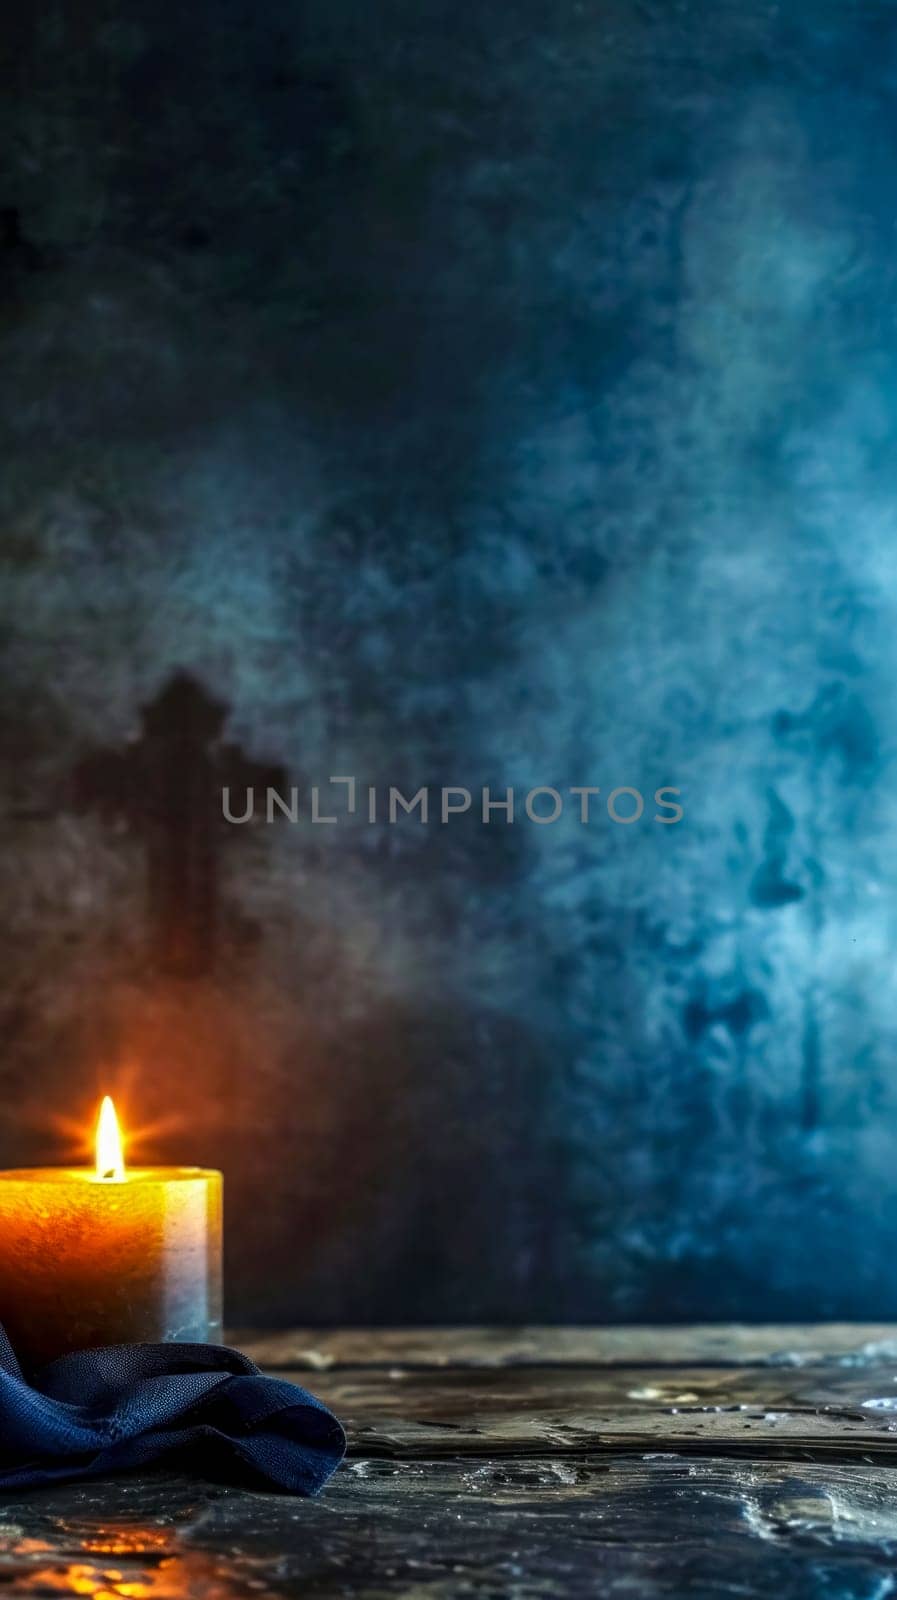 single lit candle casting a warm glow against a dark, textured backdrop with a subtle cross silhouette, conveying a sense of hope, contemplation, and solemnity within a spiritual or religious context by Edophoto